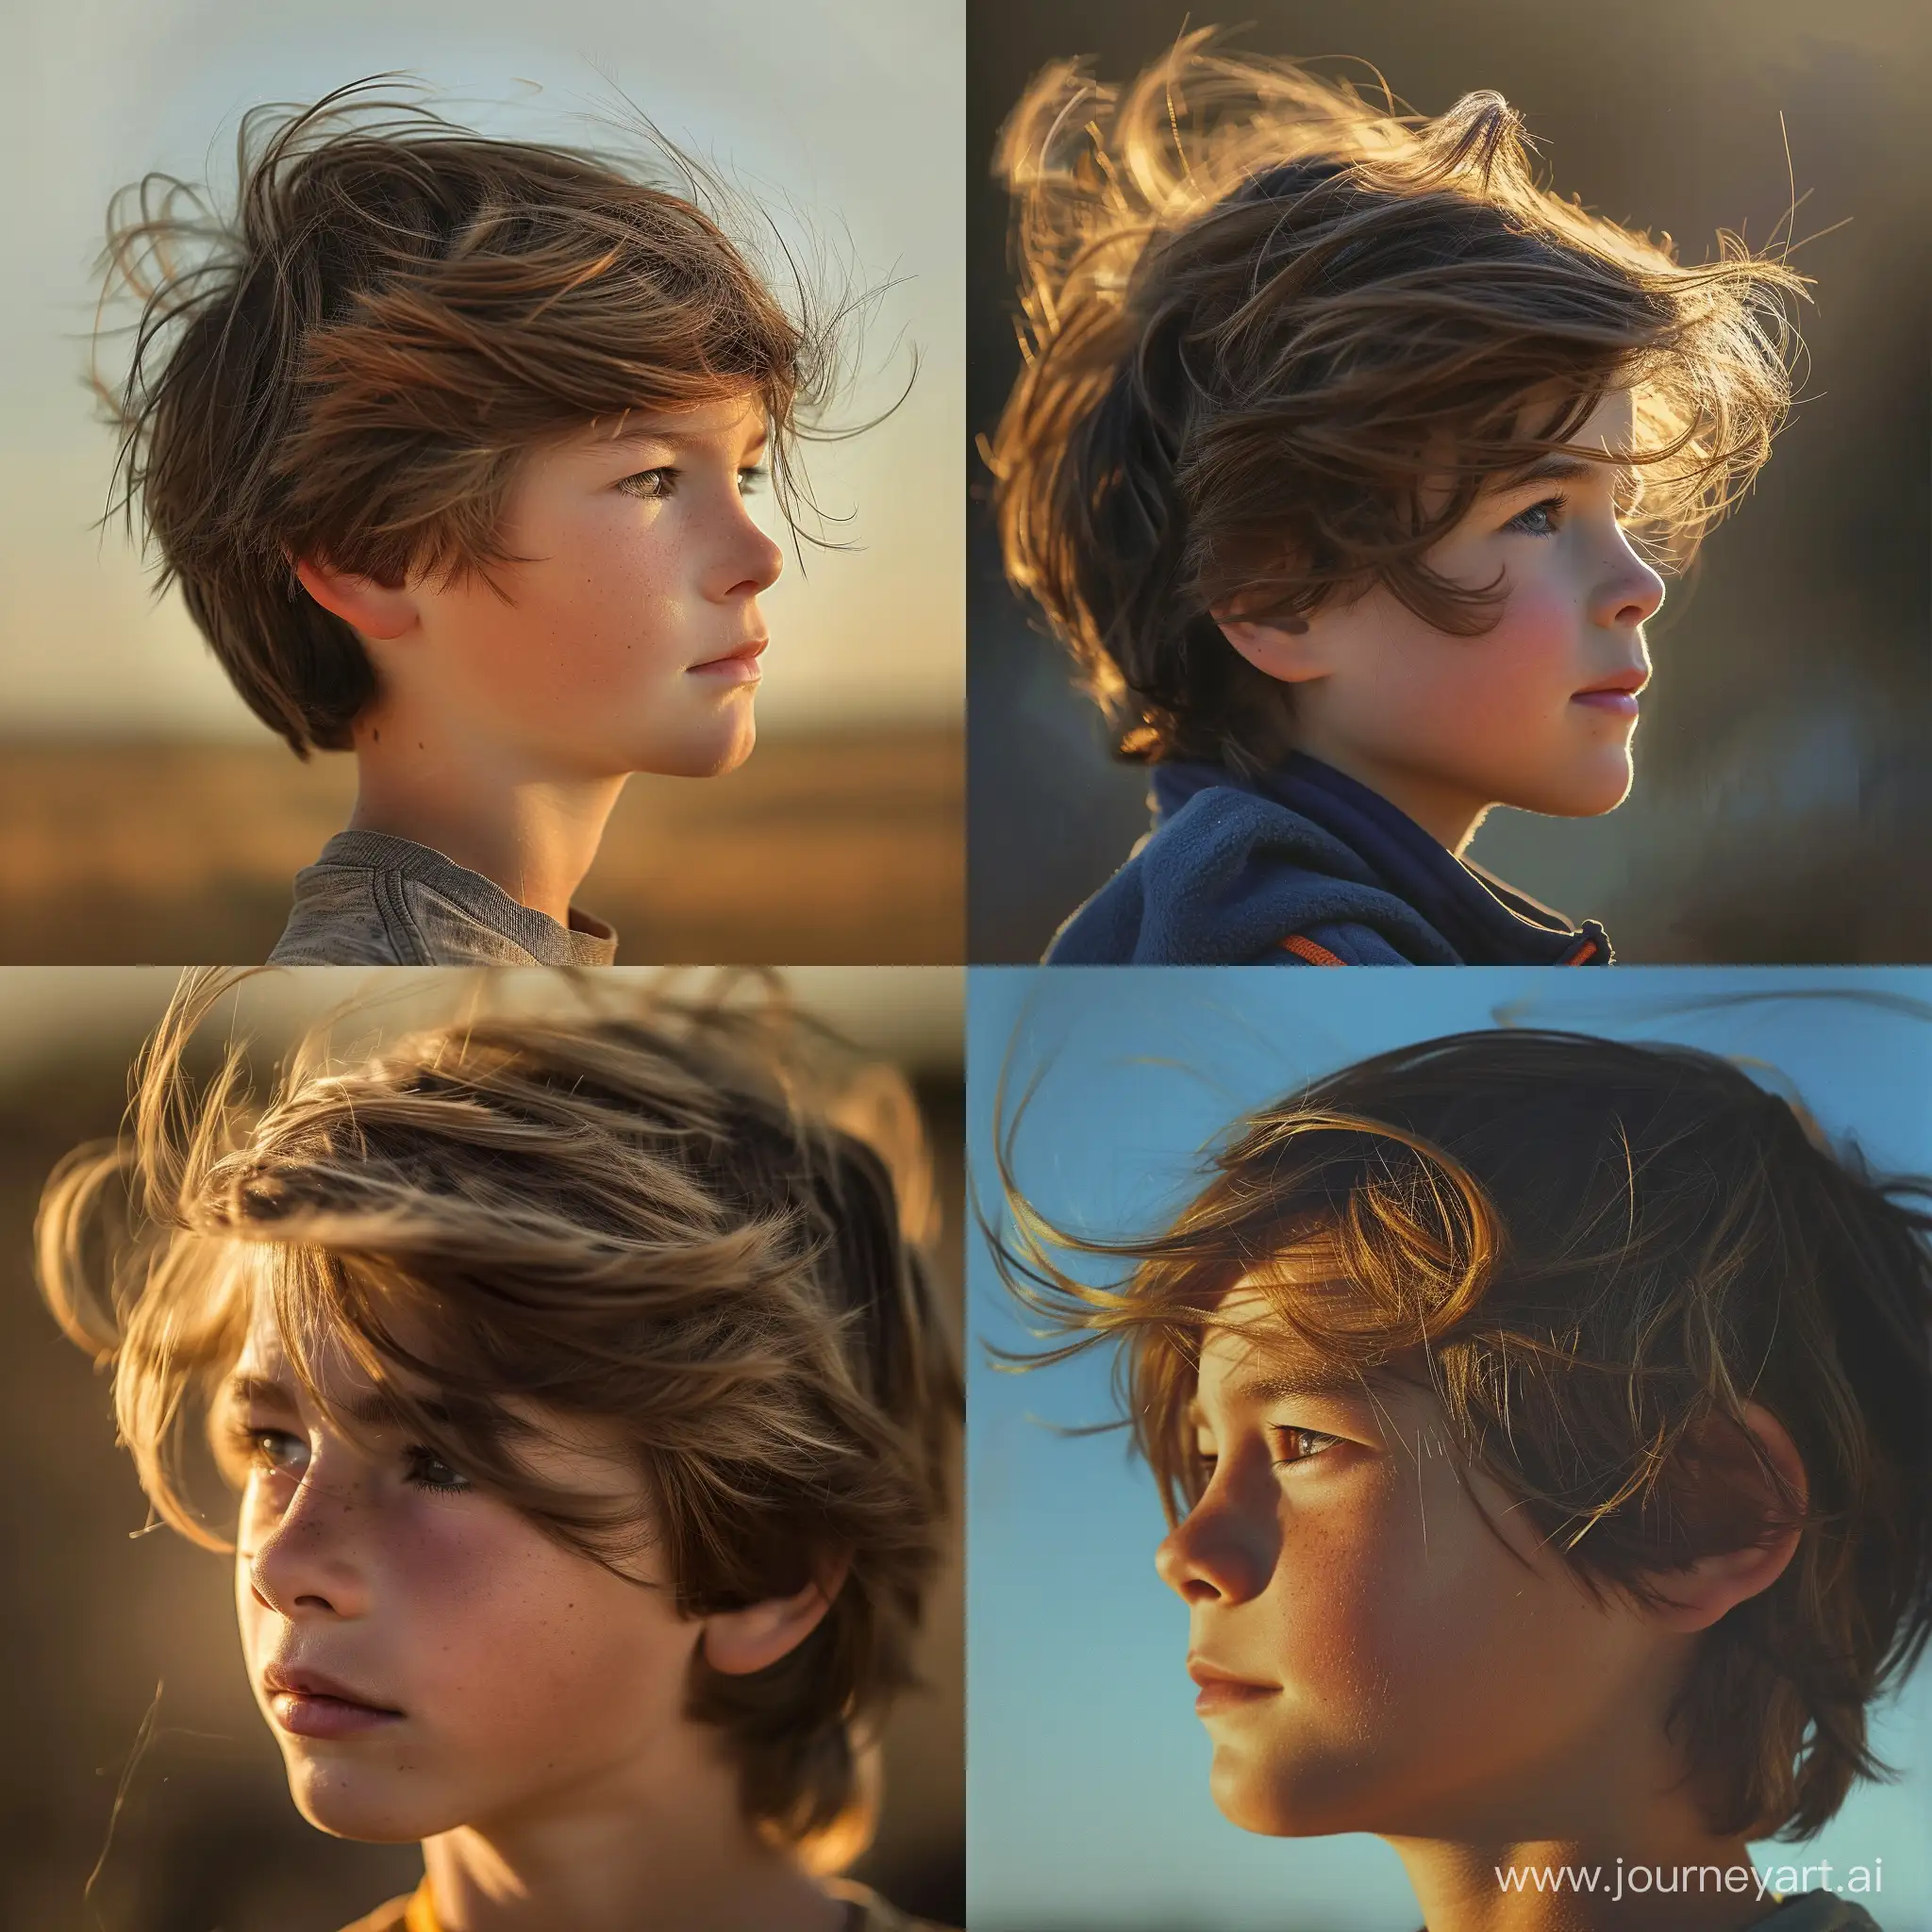 Portrait-of-a-12YearOld-Boy-Gazing-into-the-Distance-with-WindBlown-Hair-at-Noon